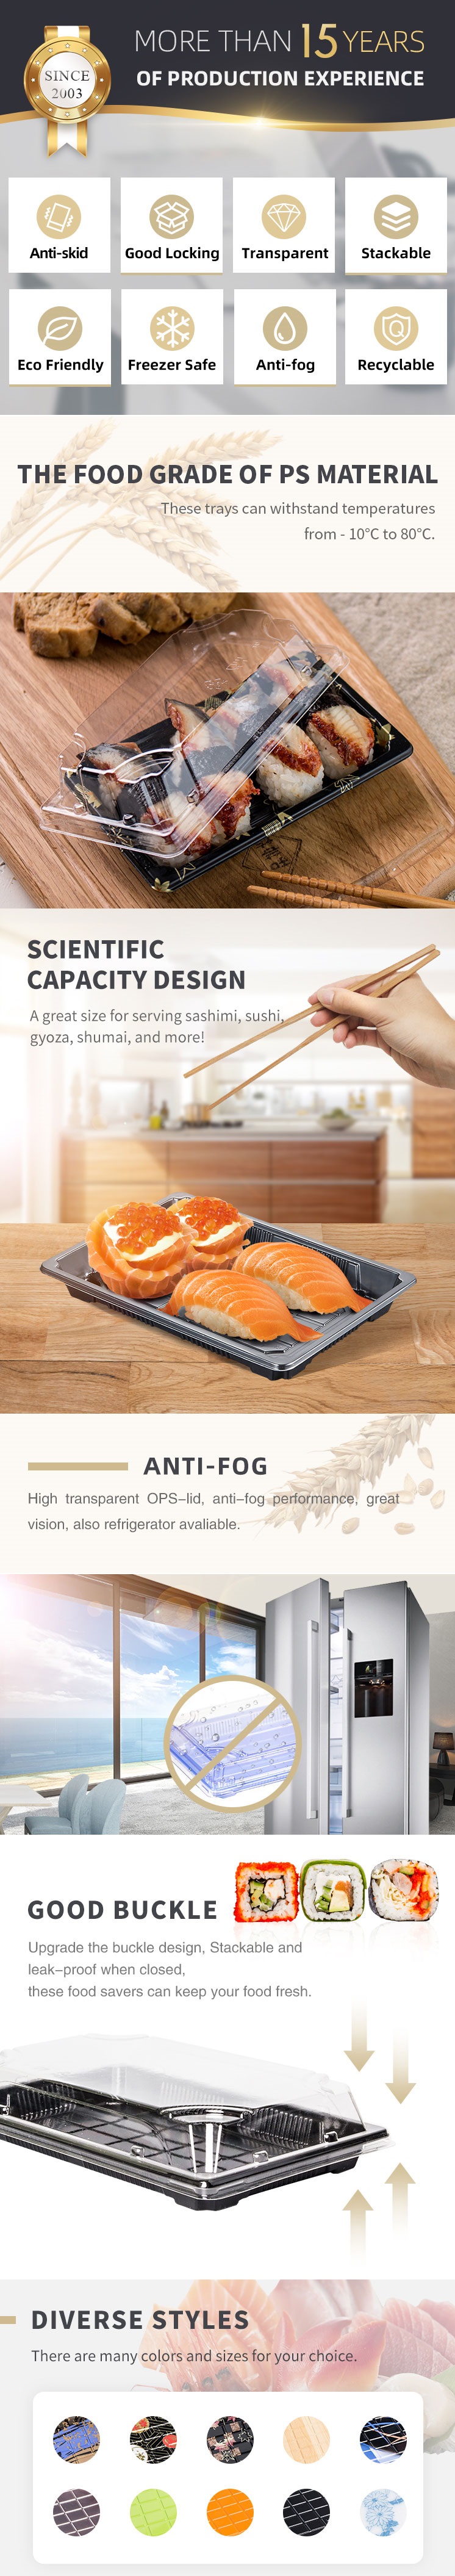 Plastic-Sushi-Meat-Food-Container-Tray-Feature.jpg